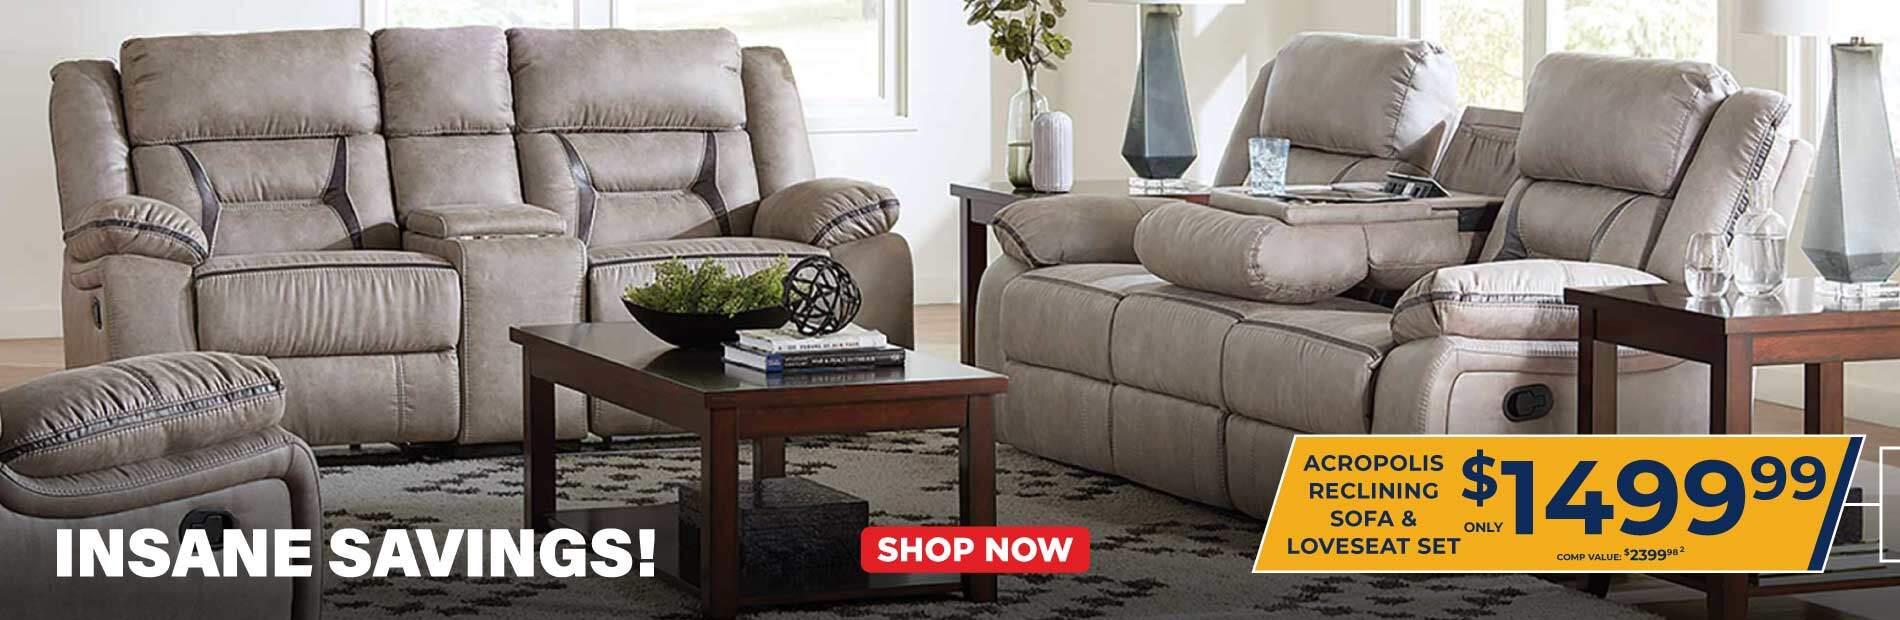 Acropolis Reclining sofa and loveseat set only $1,499.99. Comp Value 2,399.98 Shop Now